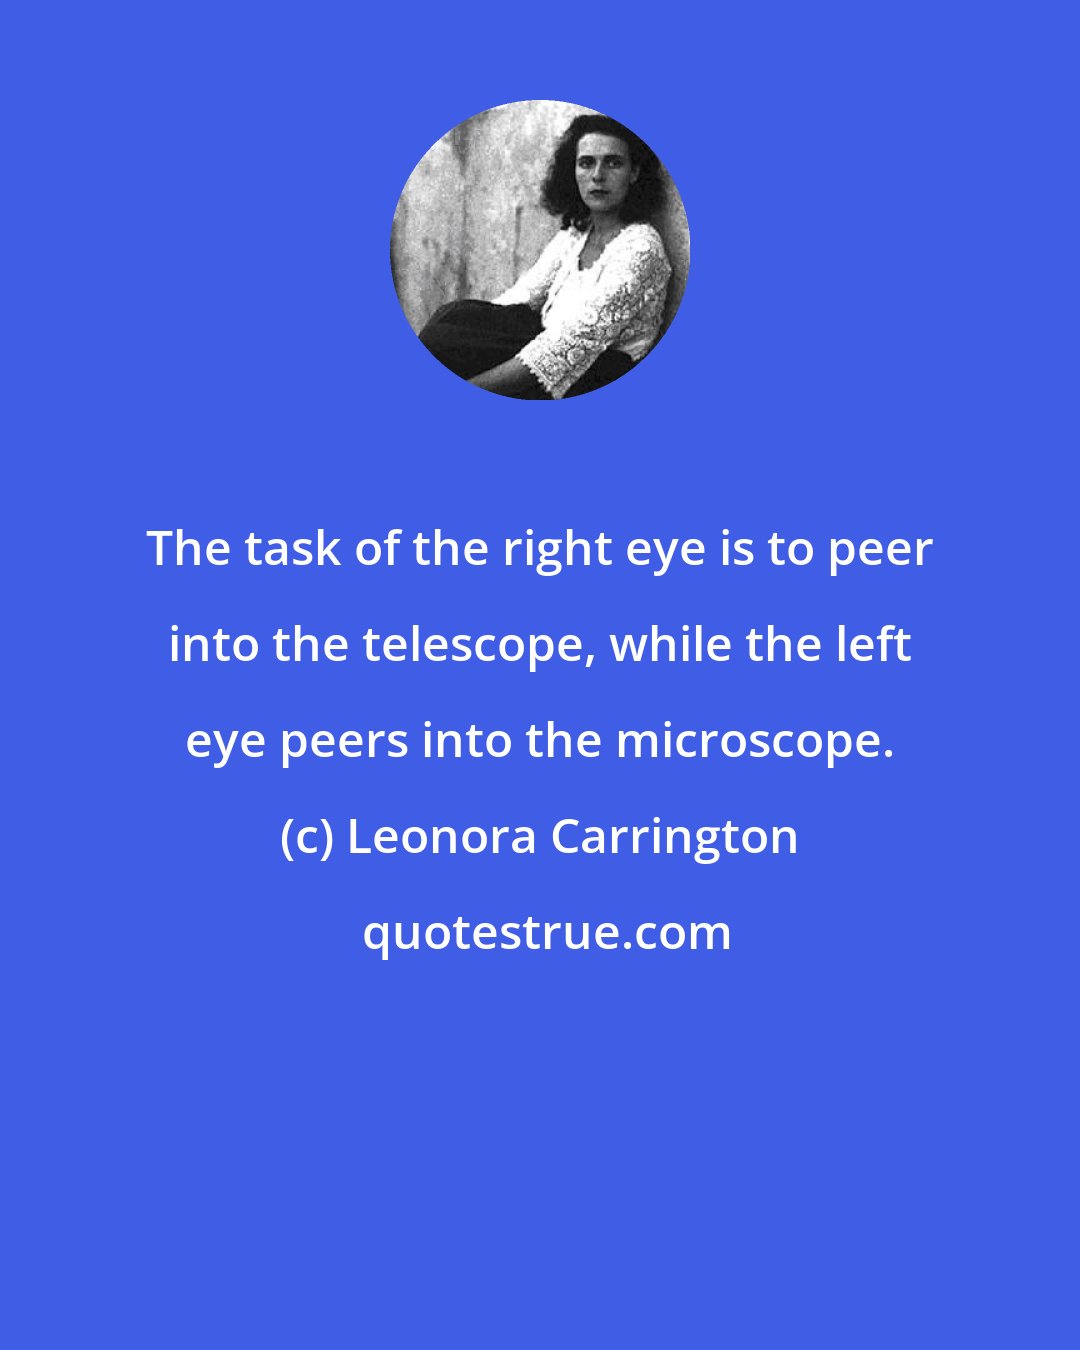 Leonora Carrington: The task of the right eye is to peer into the telescope, while the left eye peers into the microscope.